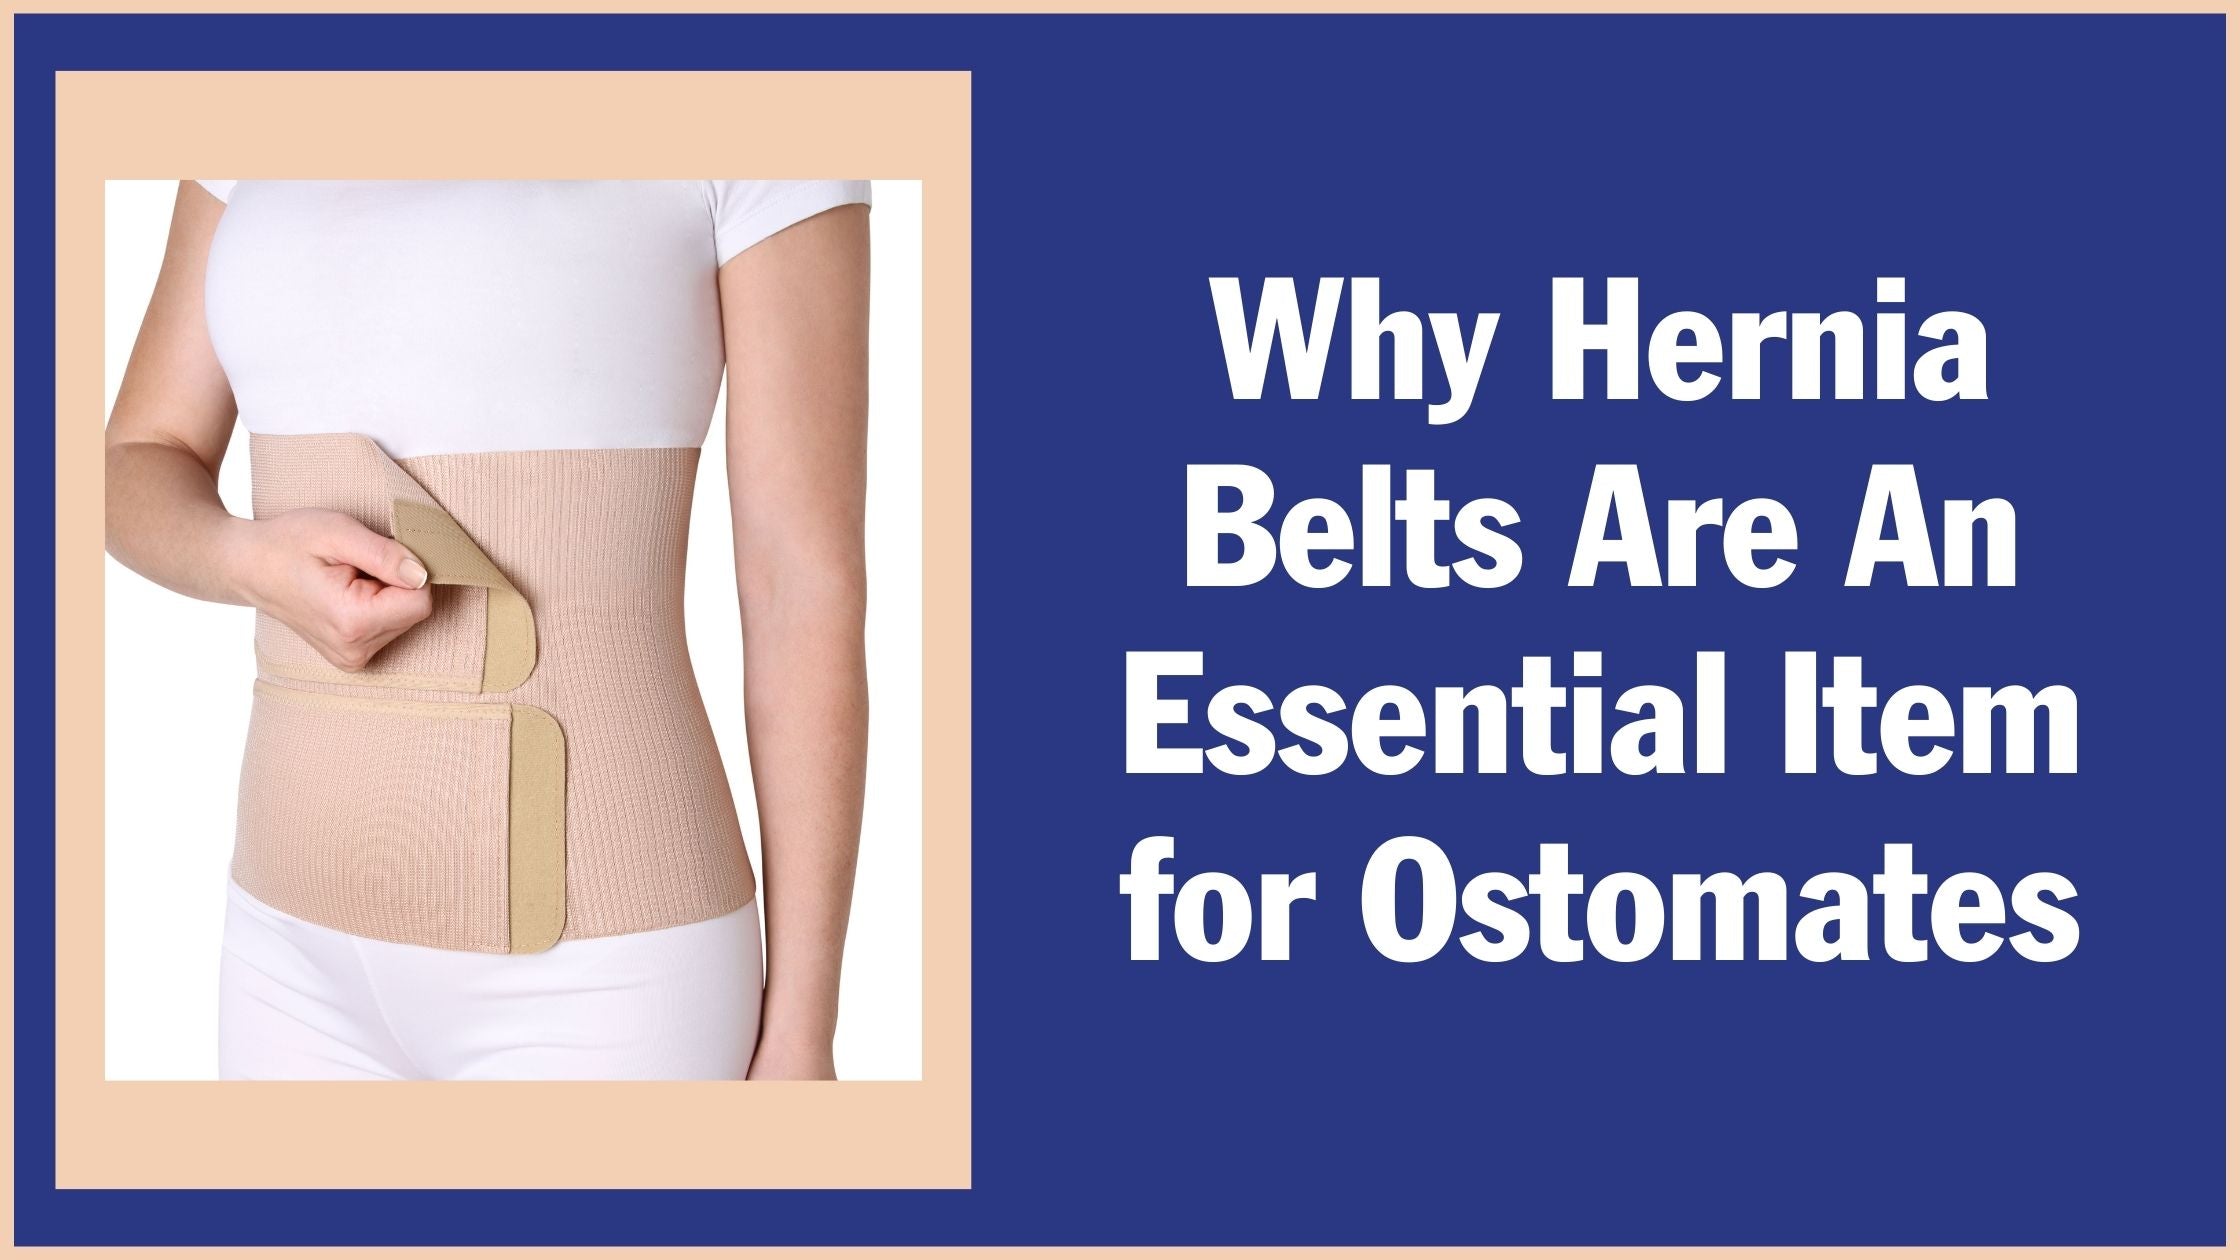 Why Hernia Belts Are an Essential Item for Ostomates